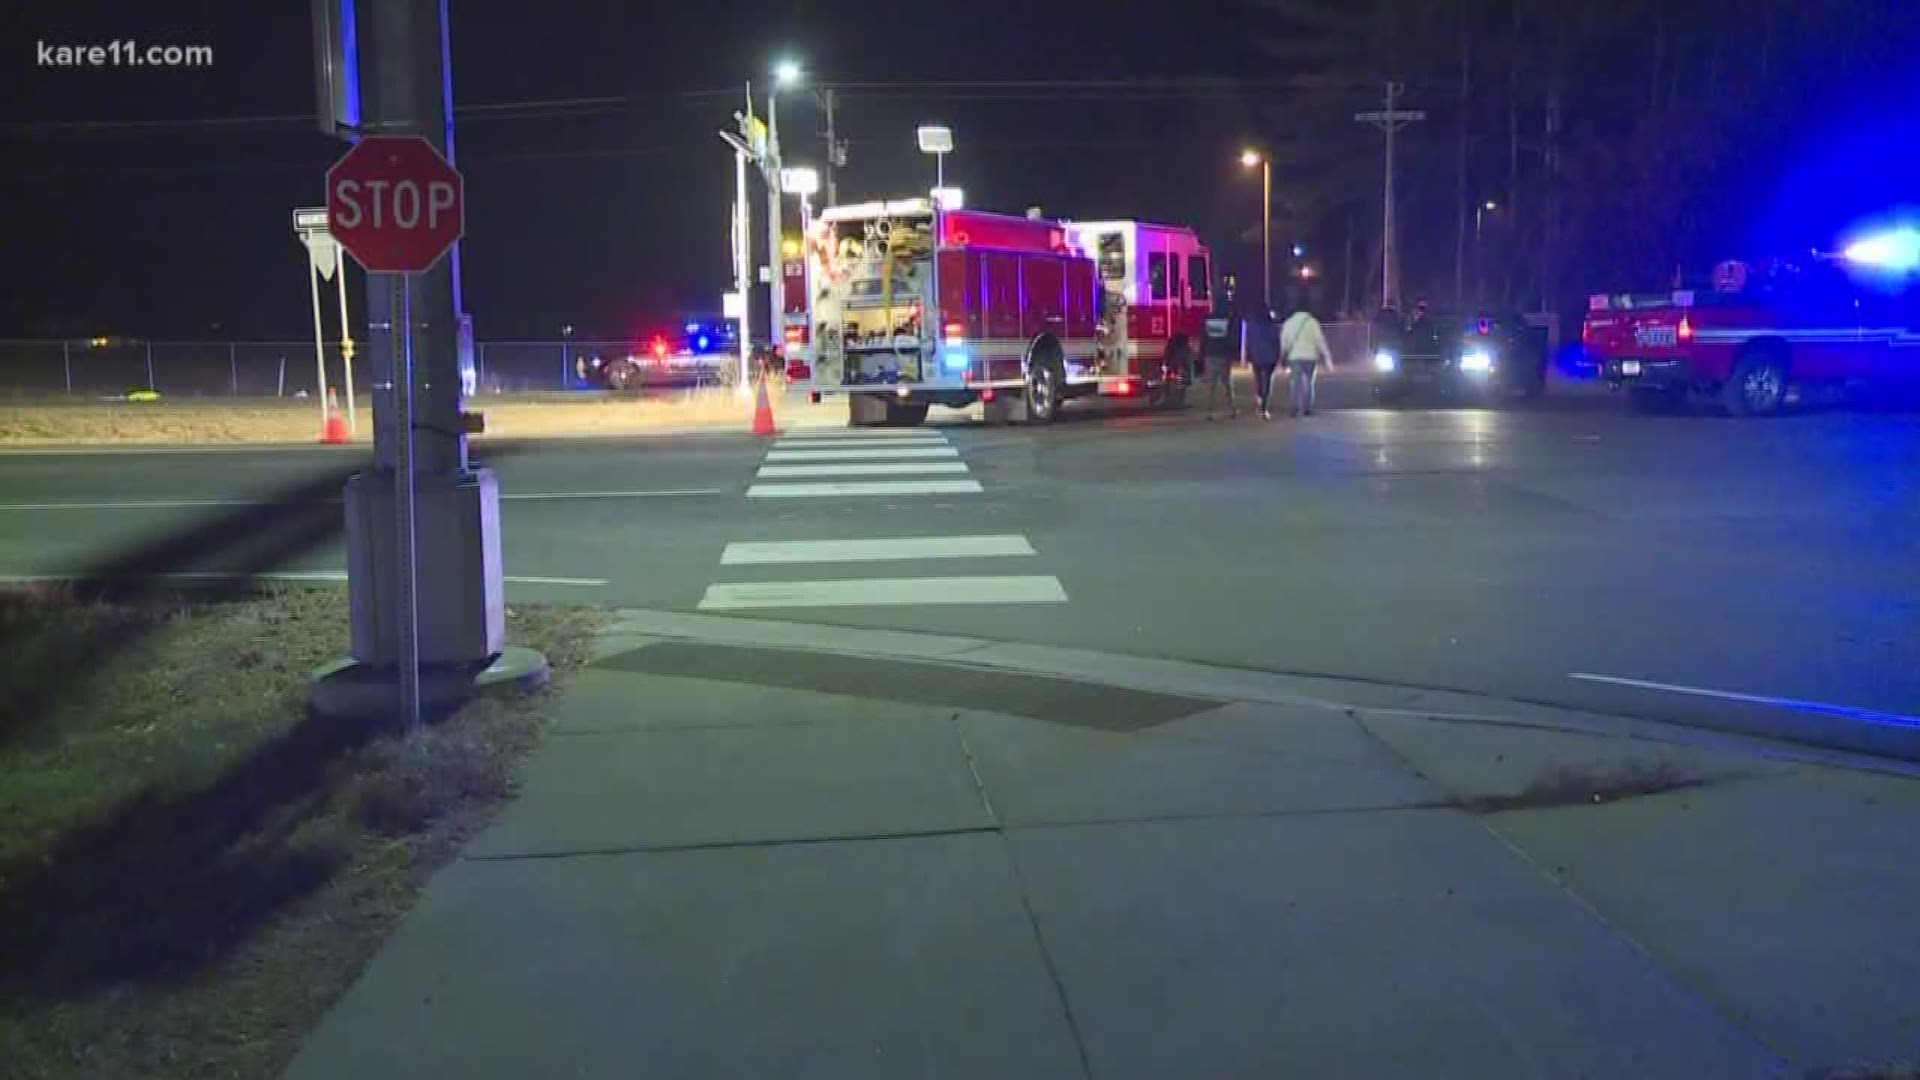 Two 14-year-old girls were struck by a vehicle and injured while crossing a highway in St. Francis, Minnesota.